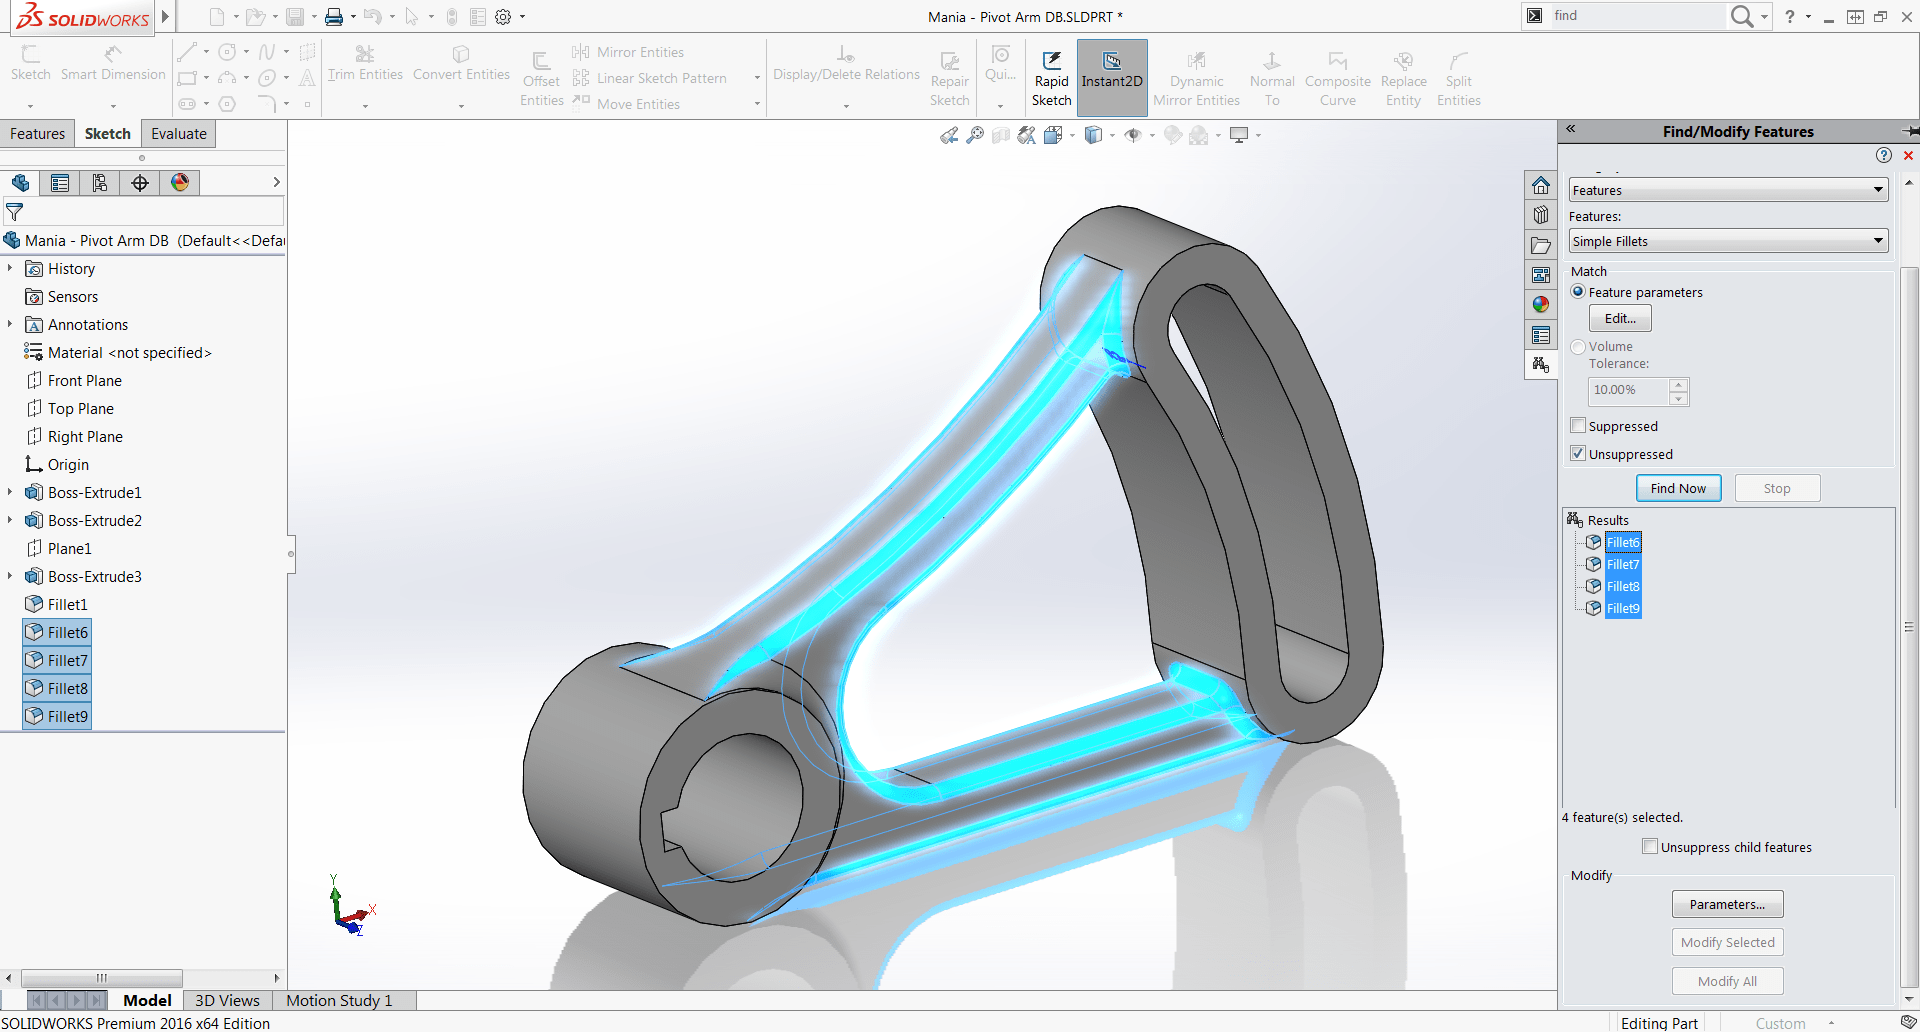 SolidWorks: Find/Modify Features - Changing Multiple Features at Once